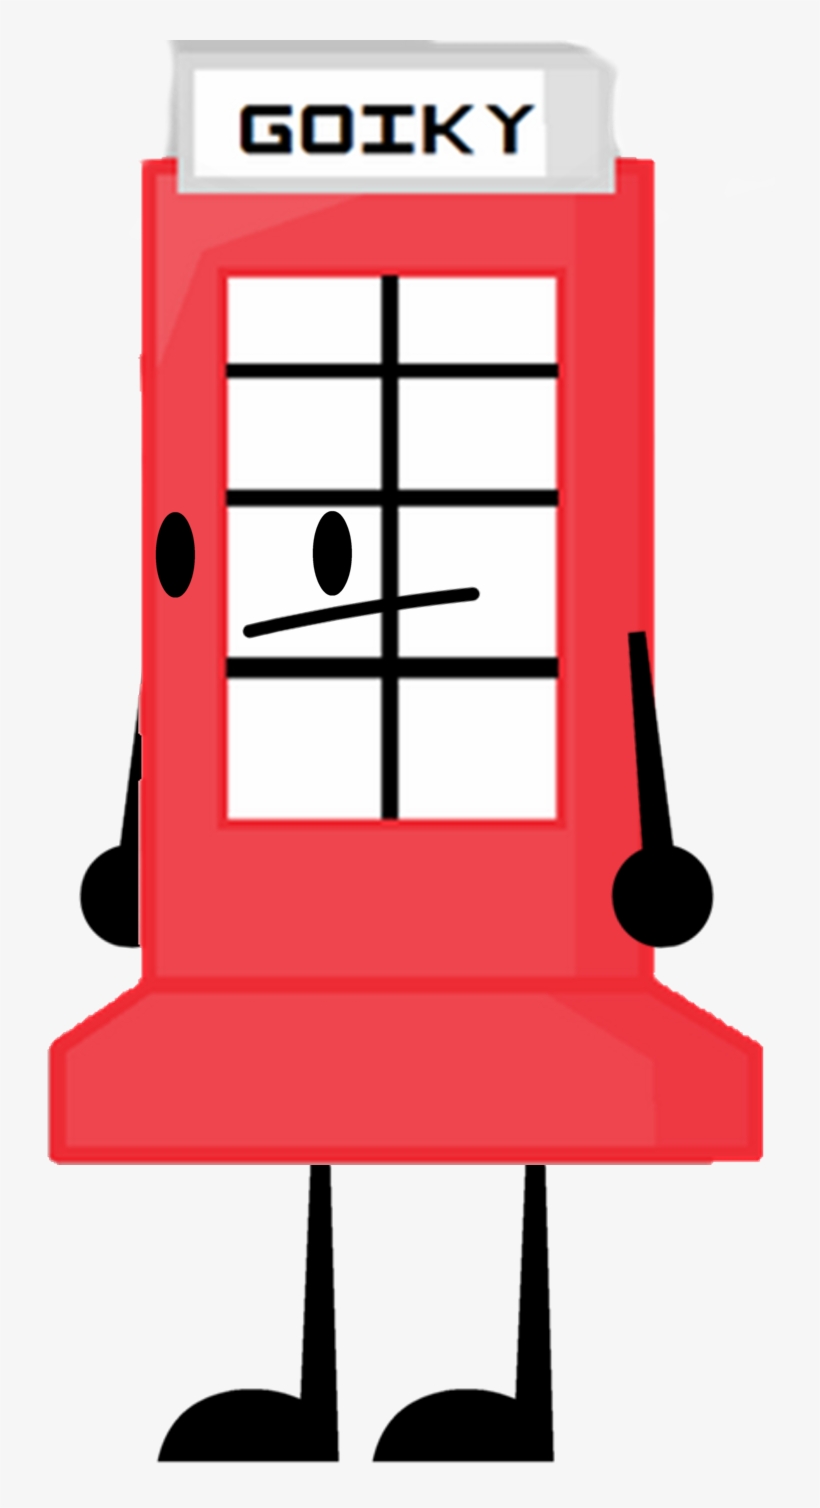 Telephone Booth 2 - Telephone Booth Twisted Turns, transparent png #3613377